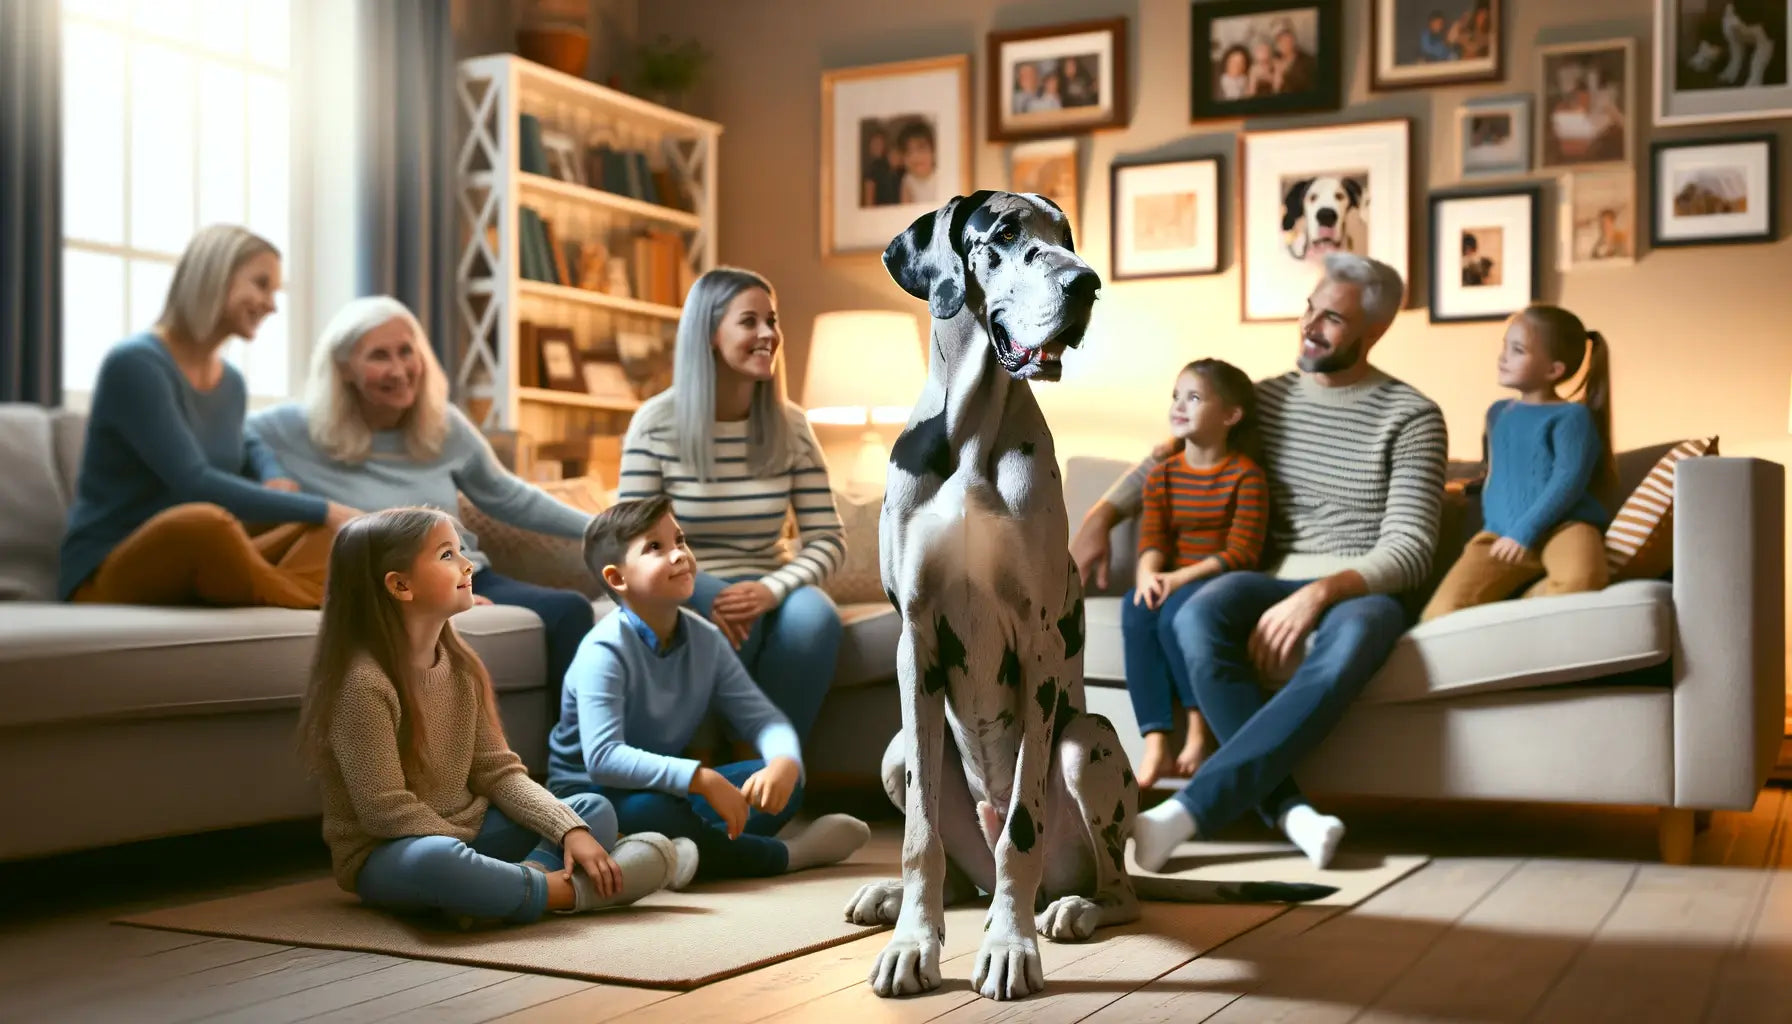 A Merle Great Dane in a family setting surrounded by children and adults in a cozy living room.